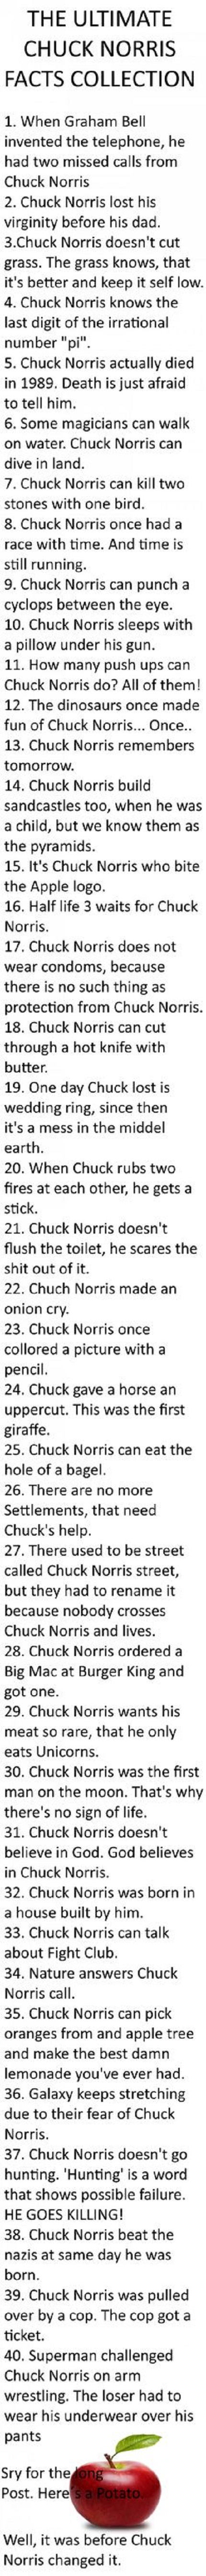 Ultimate Chuck Norris Facts Collection